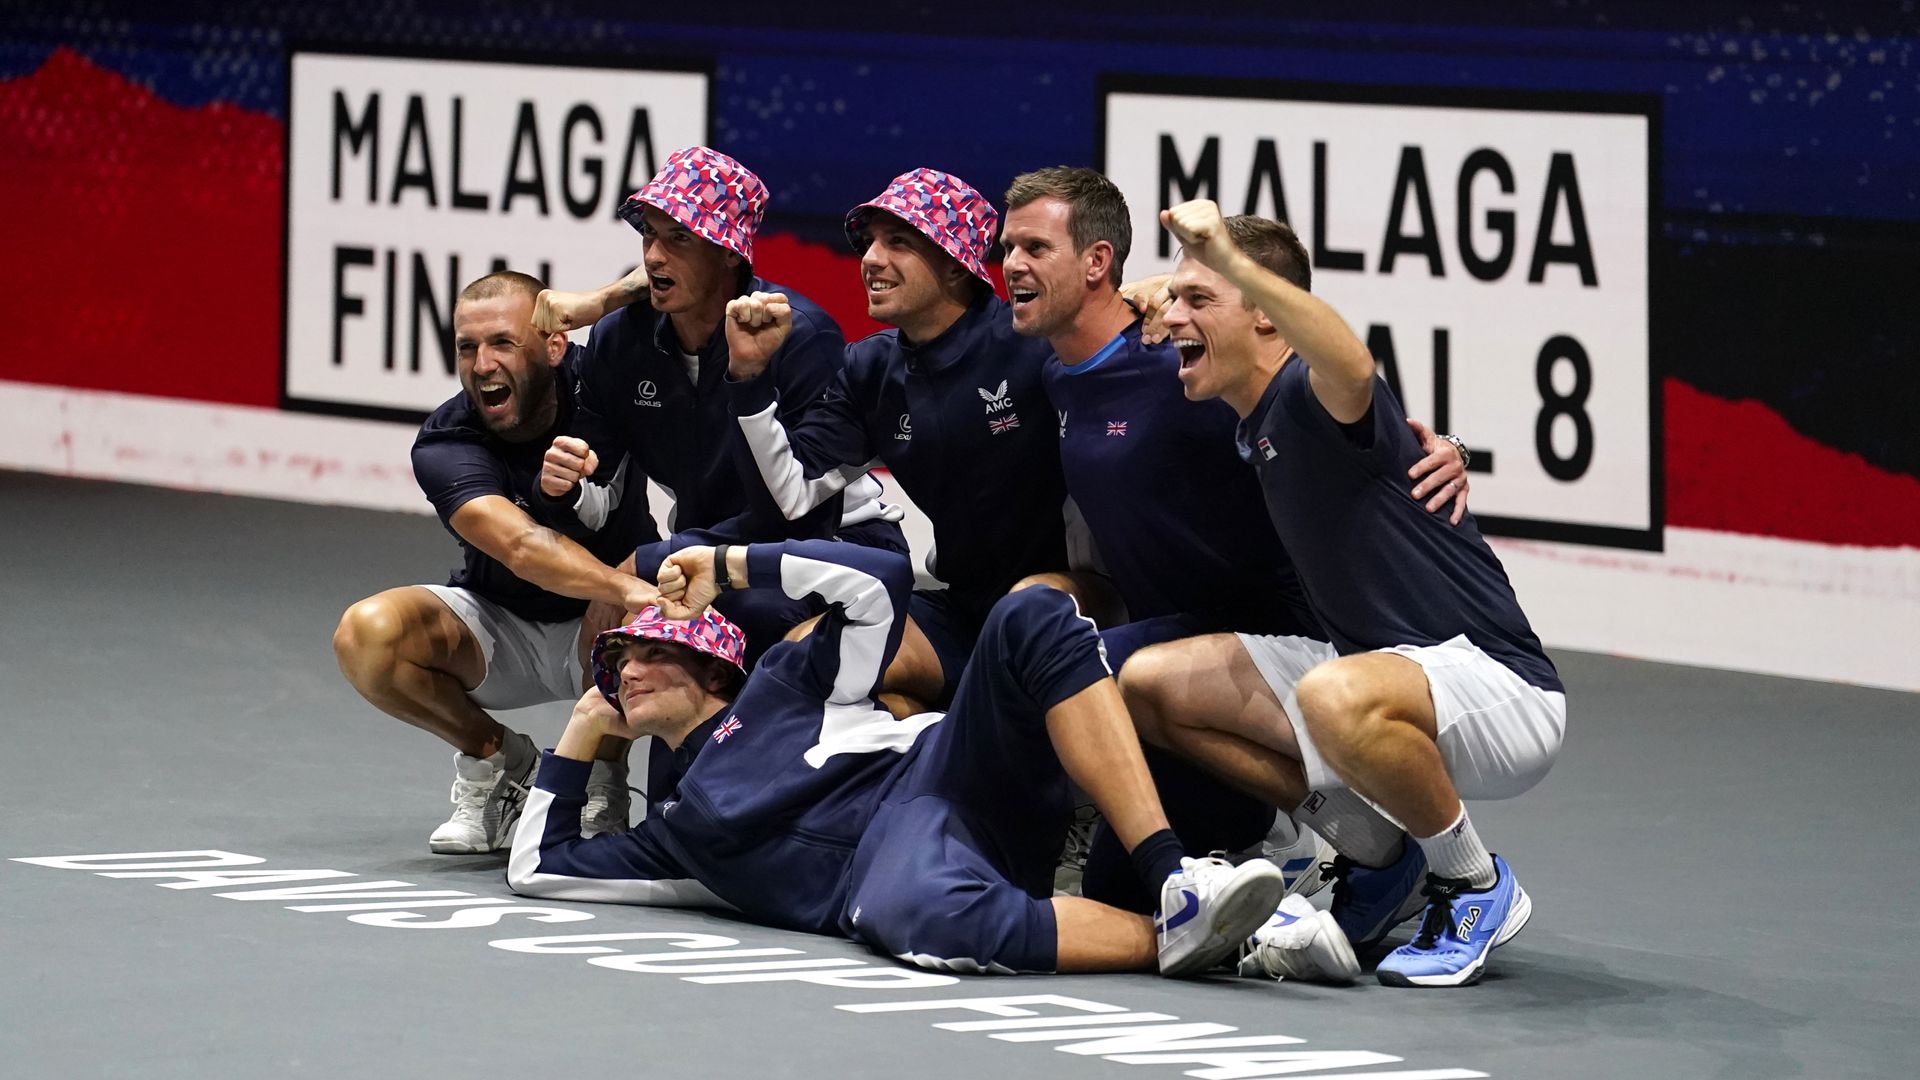 What are Great Britain's Davis Cup options after Evans' injury?